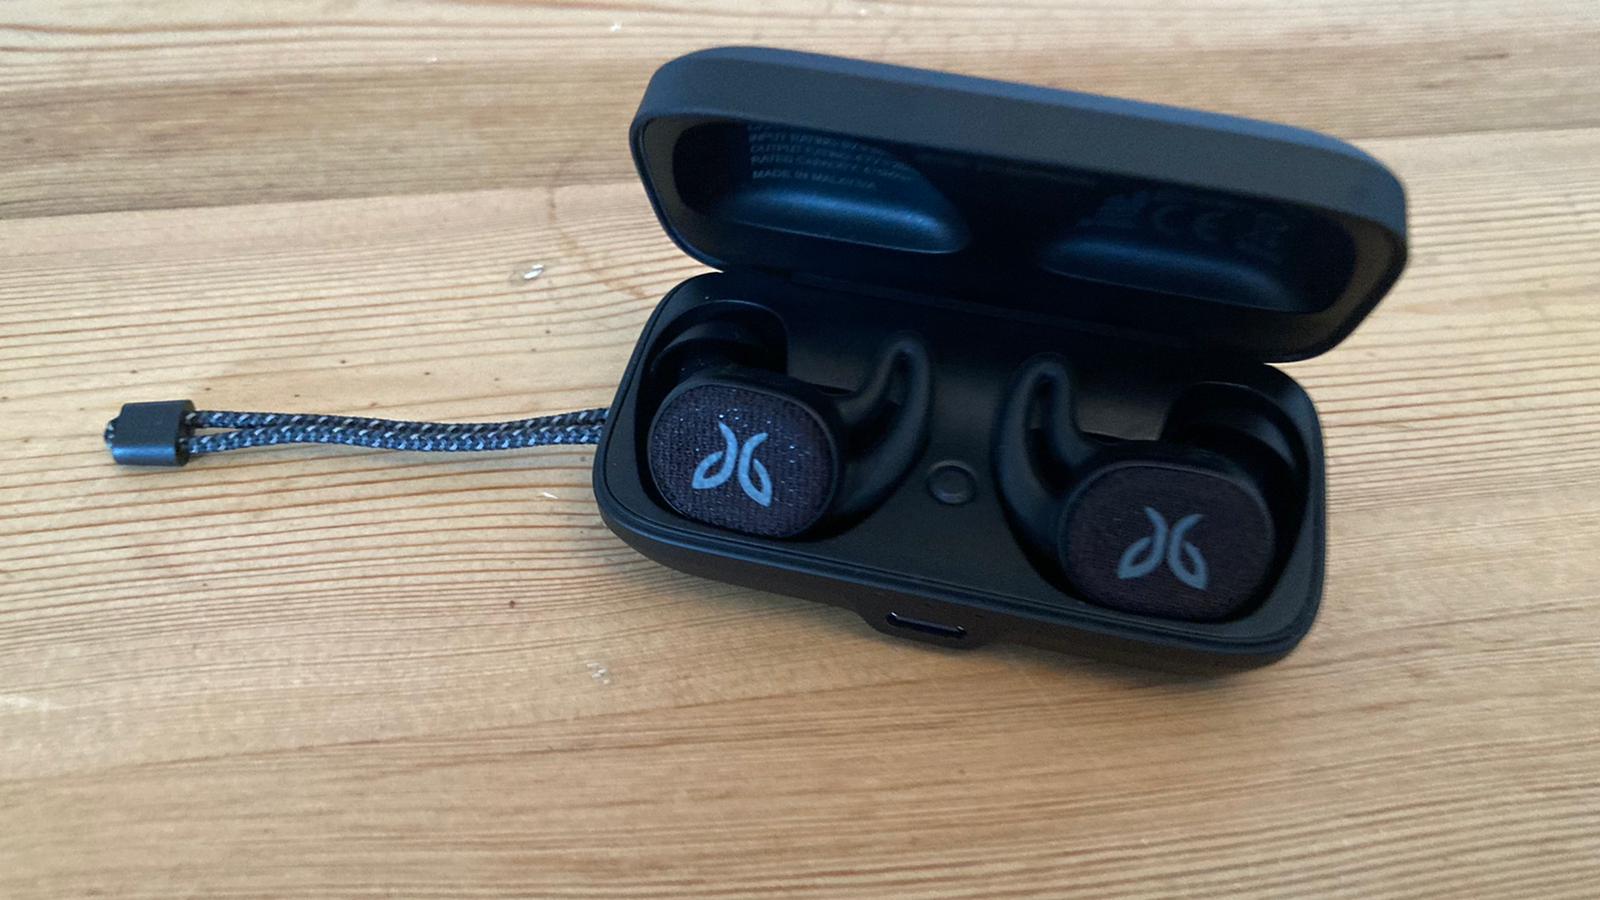 The Jaybird Vista 2 headphones tested by the Live Science team